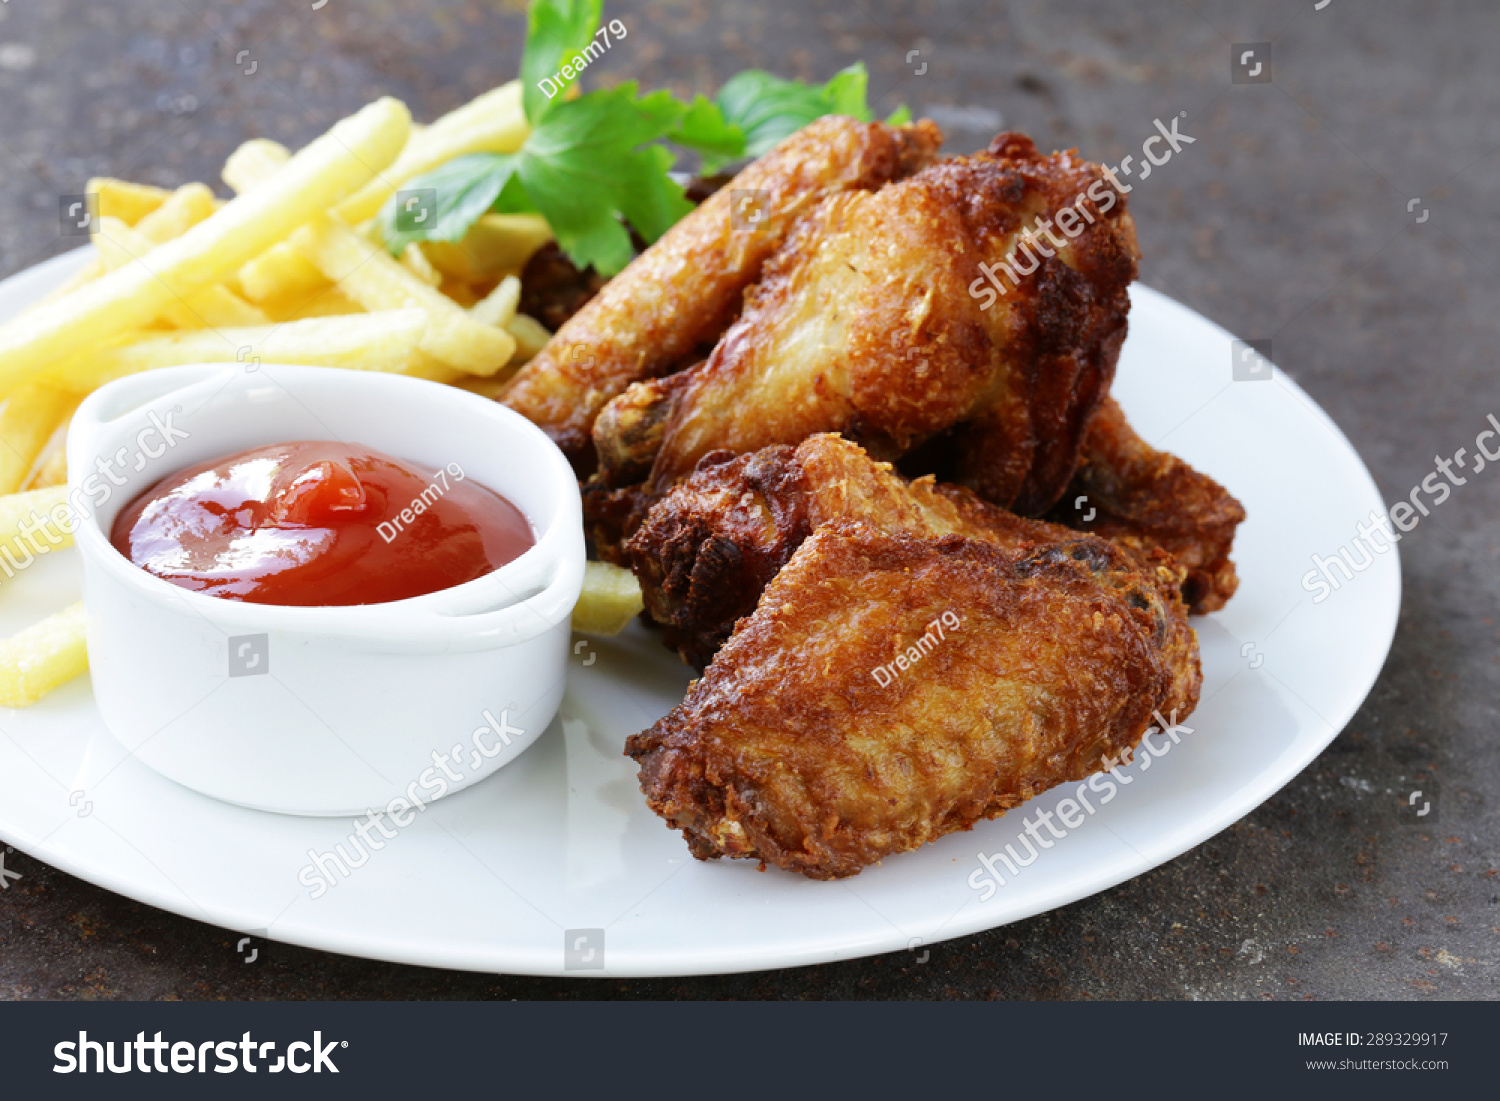 Fried Chicken Wings With Sauce And Spices Stock Photo 289329917 ...